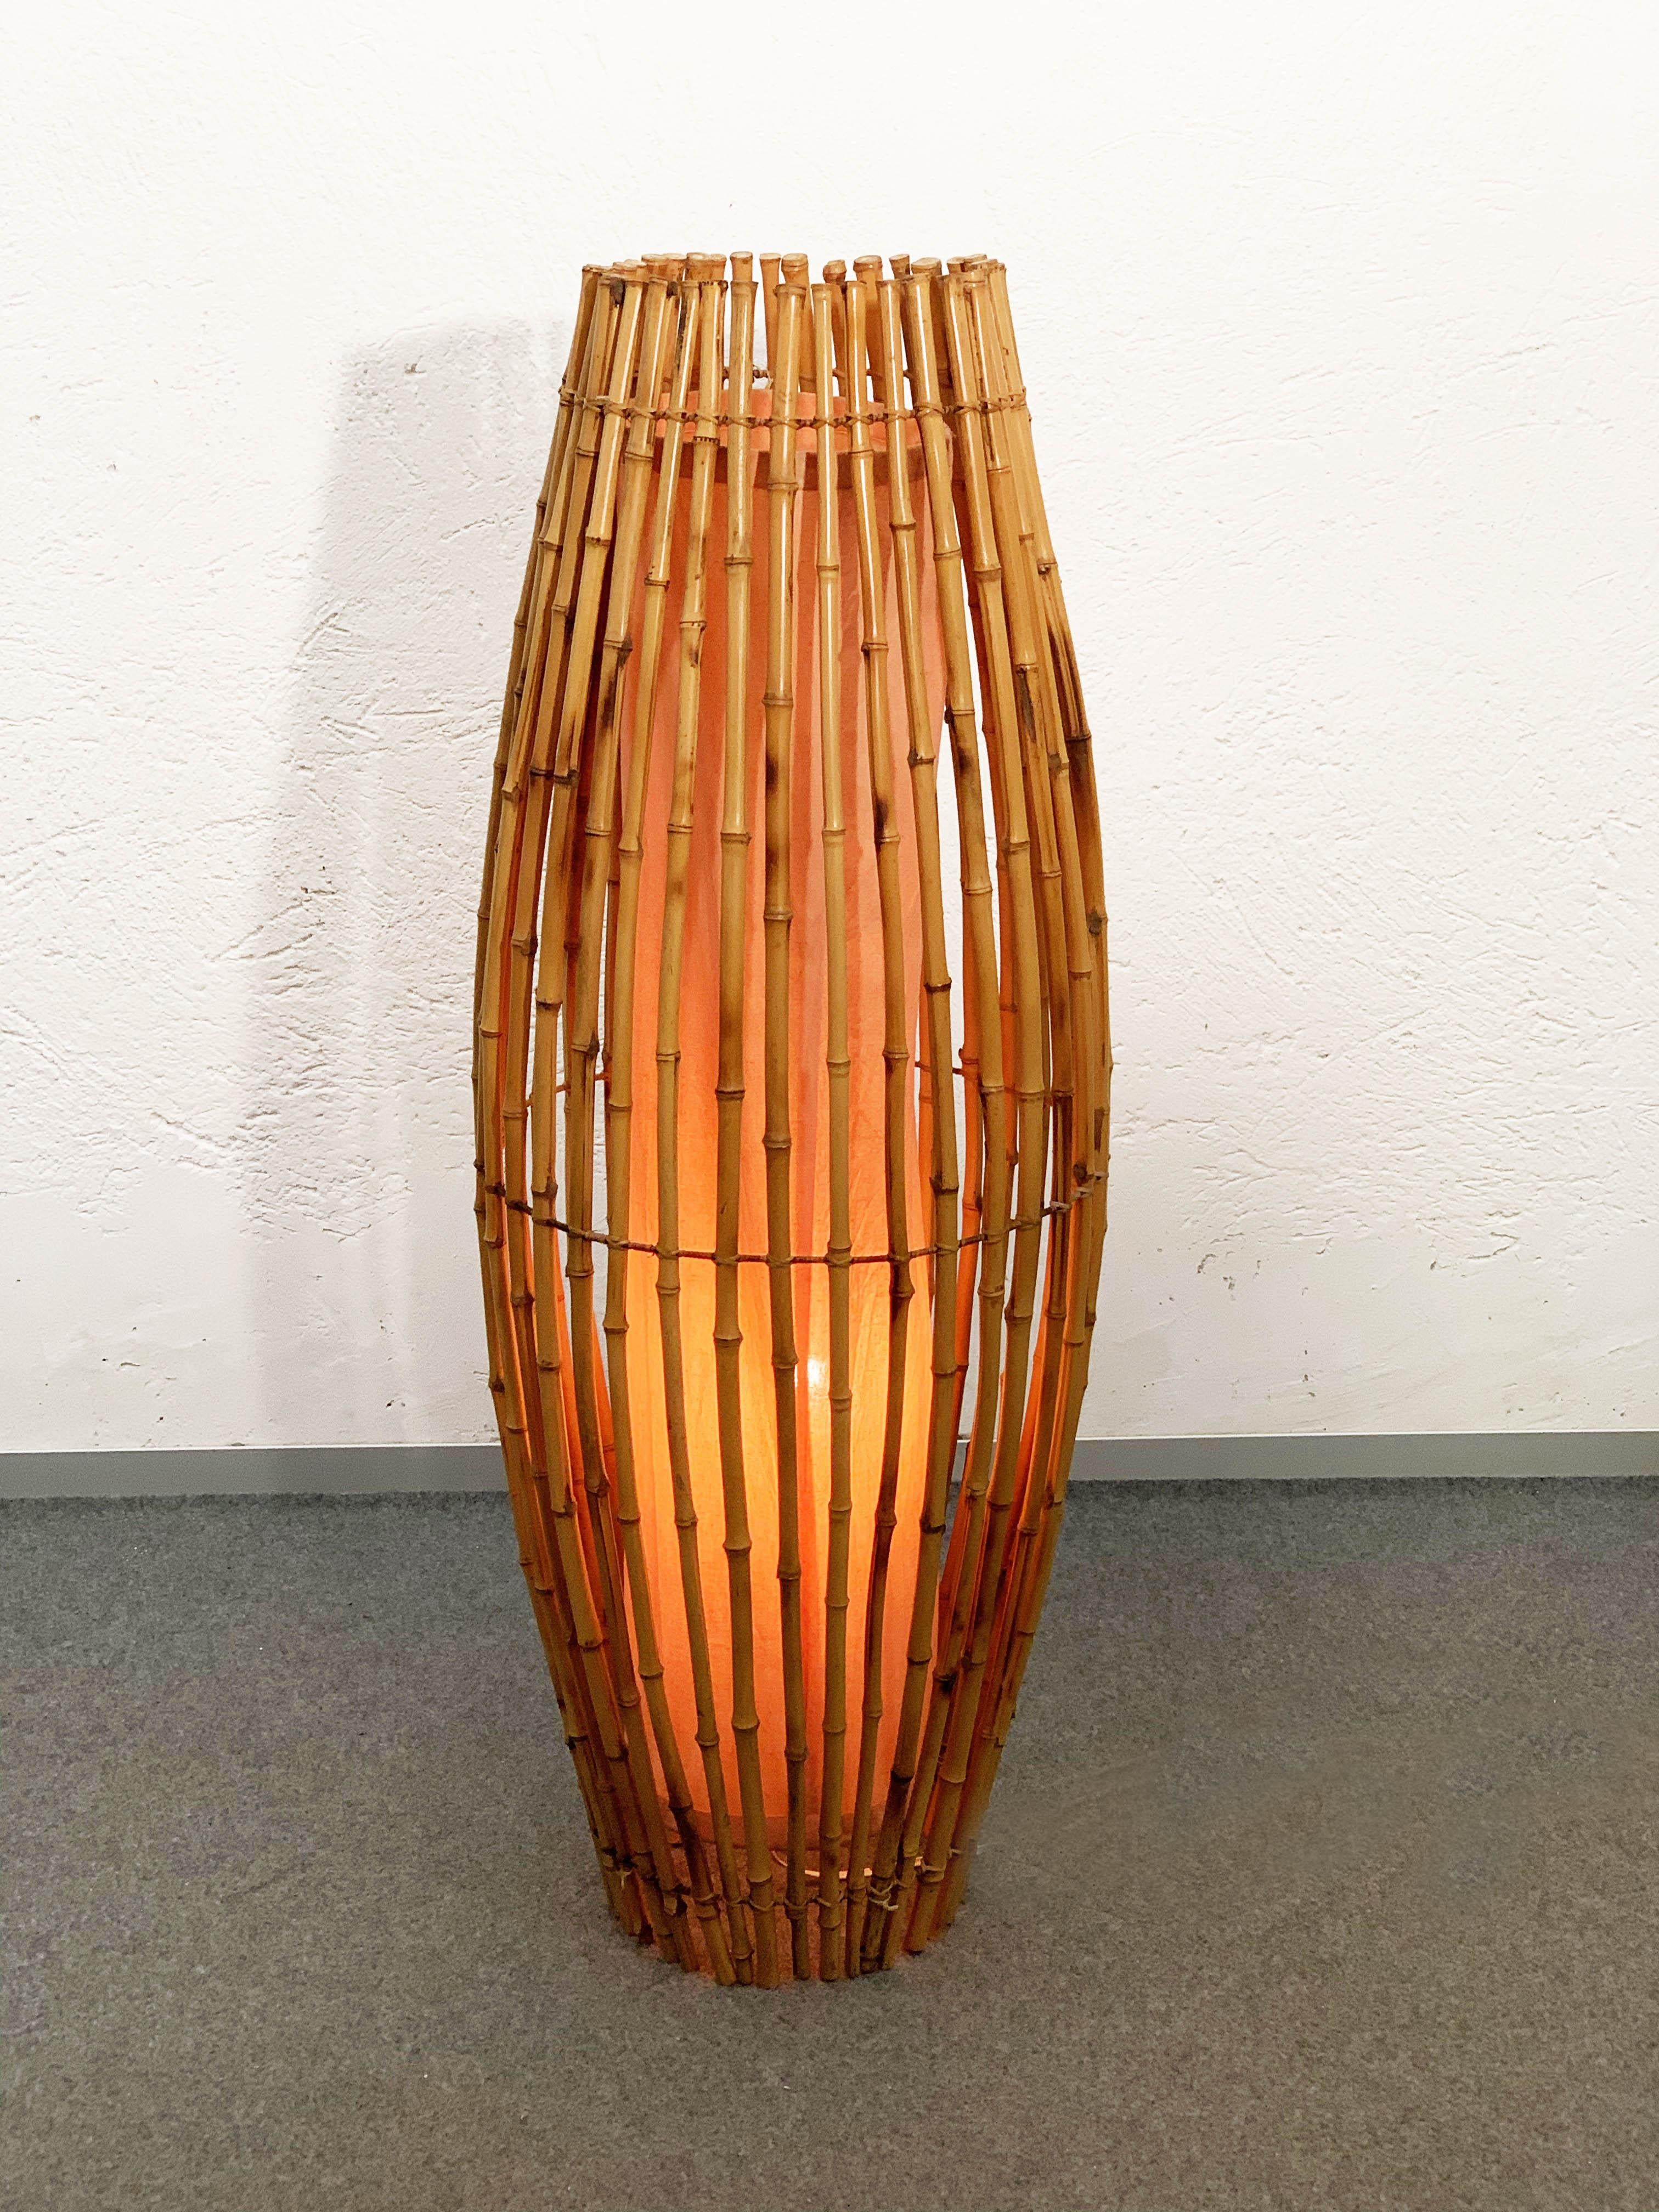 Magnificent and tall midcentury floor lamp. It is likely it is a Franco Albini production, designed in Italy during 1960s.

A rare example of how bamboo and rattan can magnify the refraction of the light, this item echoes tribal lines.

The lamp